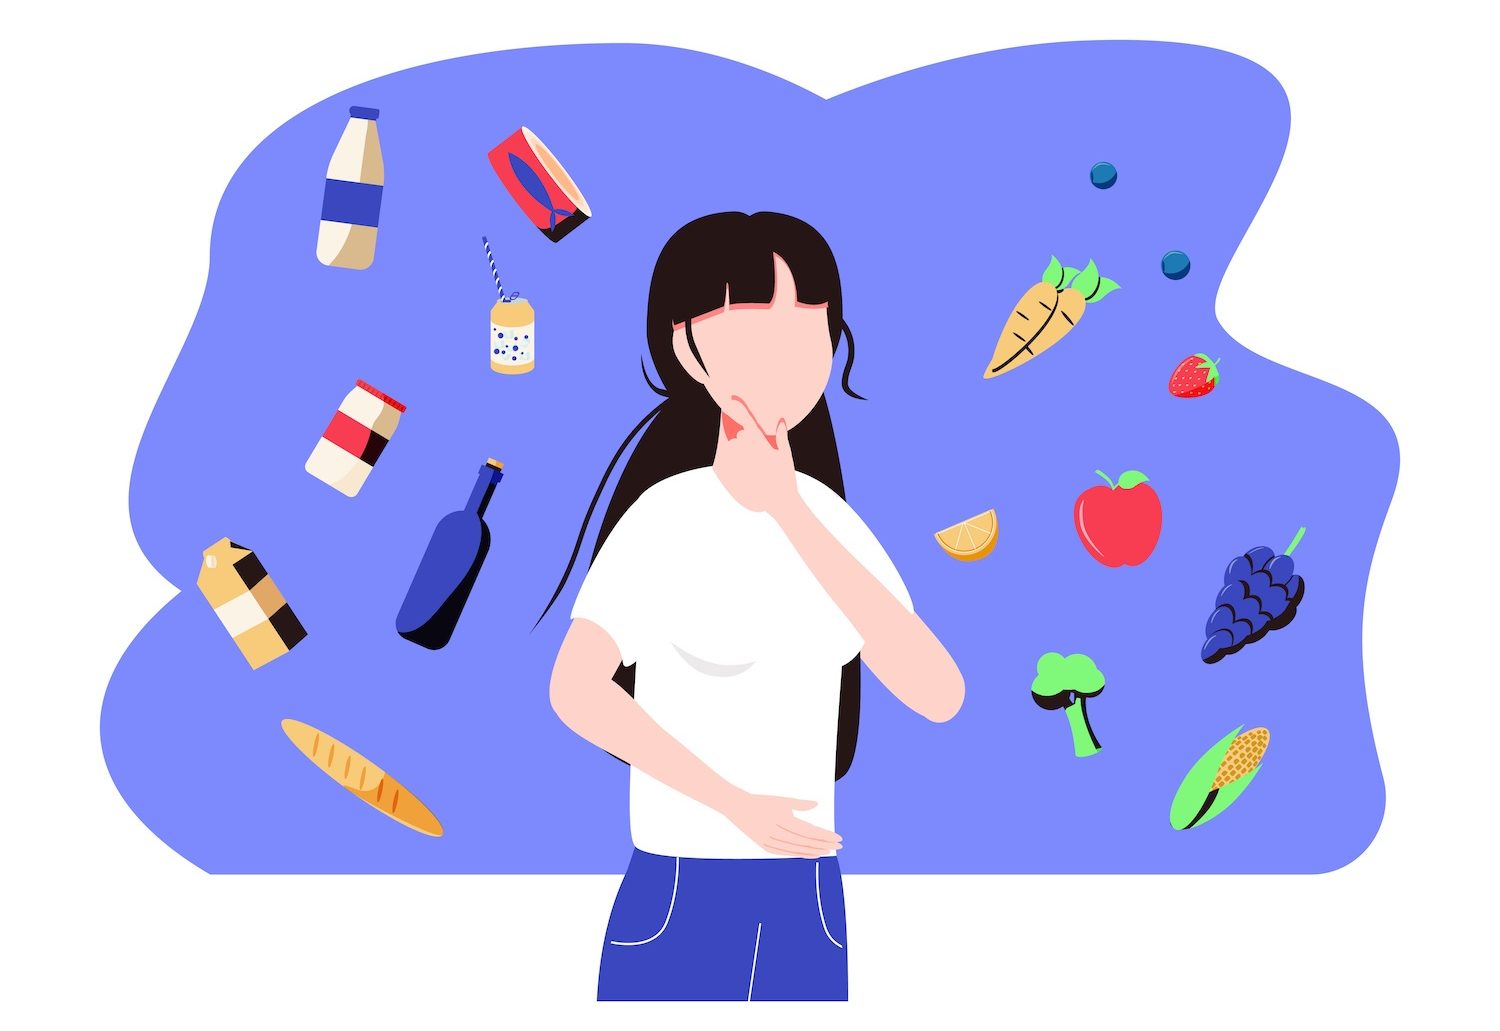 Woman choosing between healthy and unhealthy food. Character thinking over organic or junk snacks choice. Vector illustration for good vs bad diet, lifestyle, eating concepts. May 2021